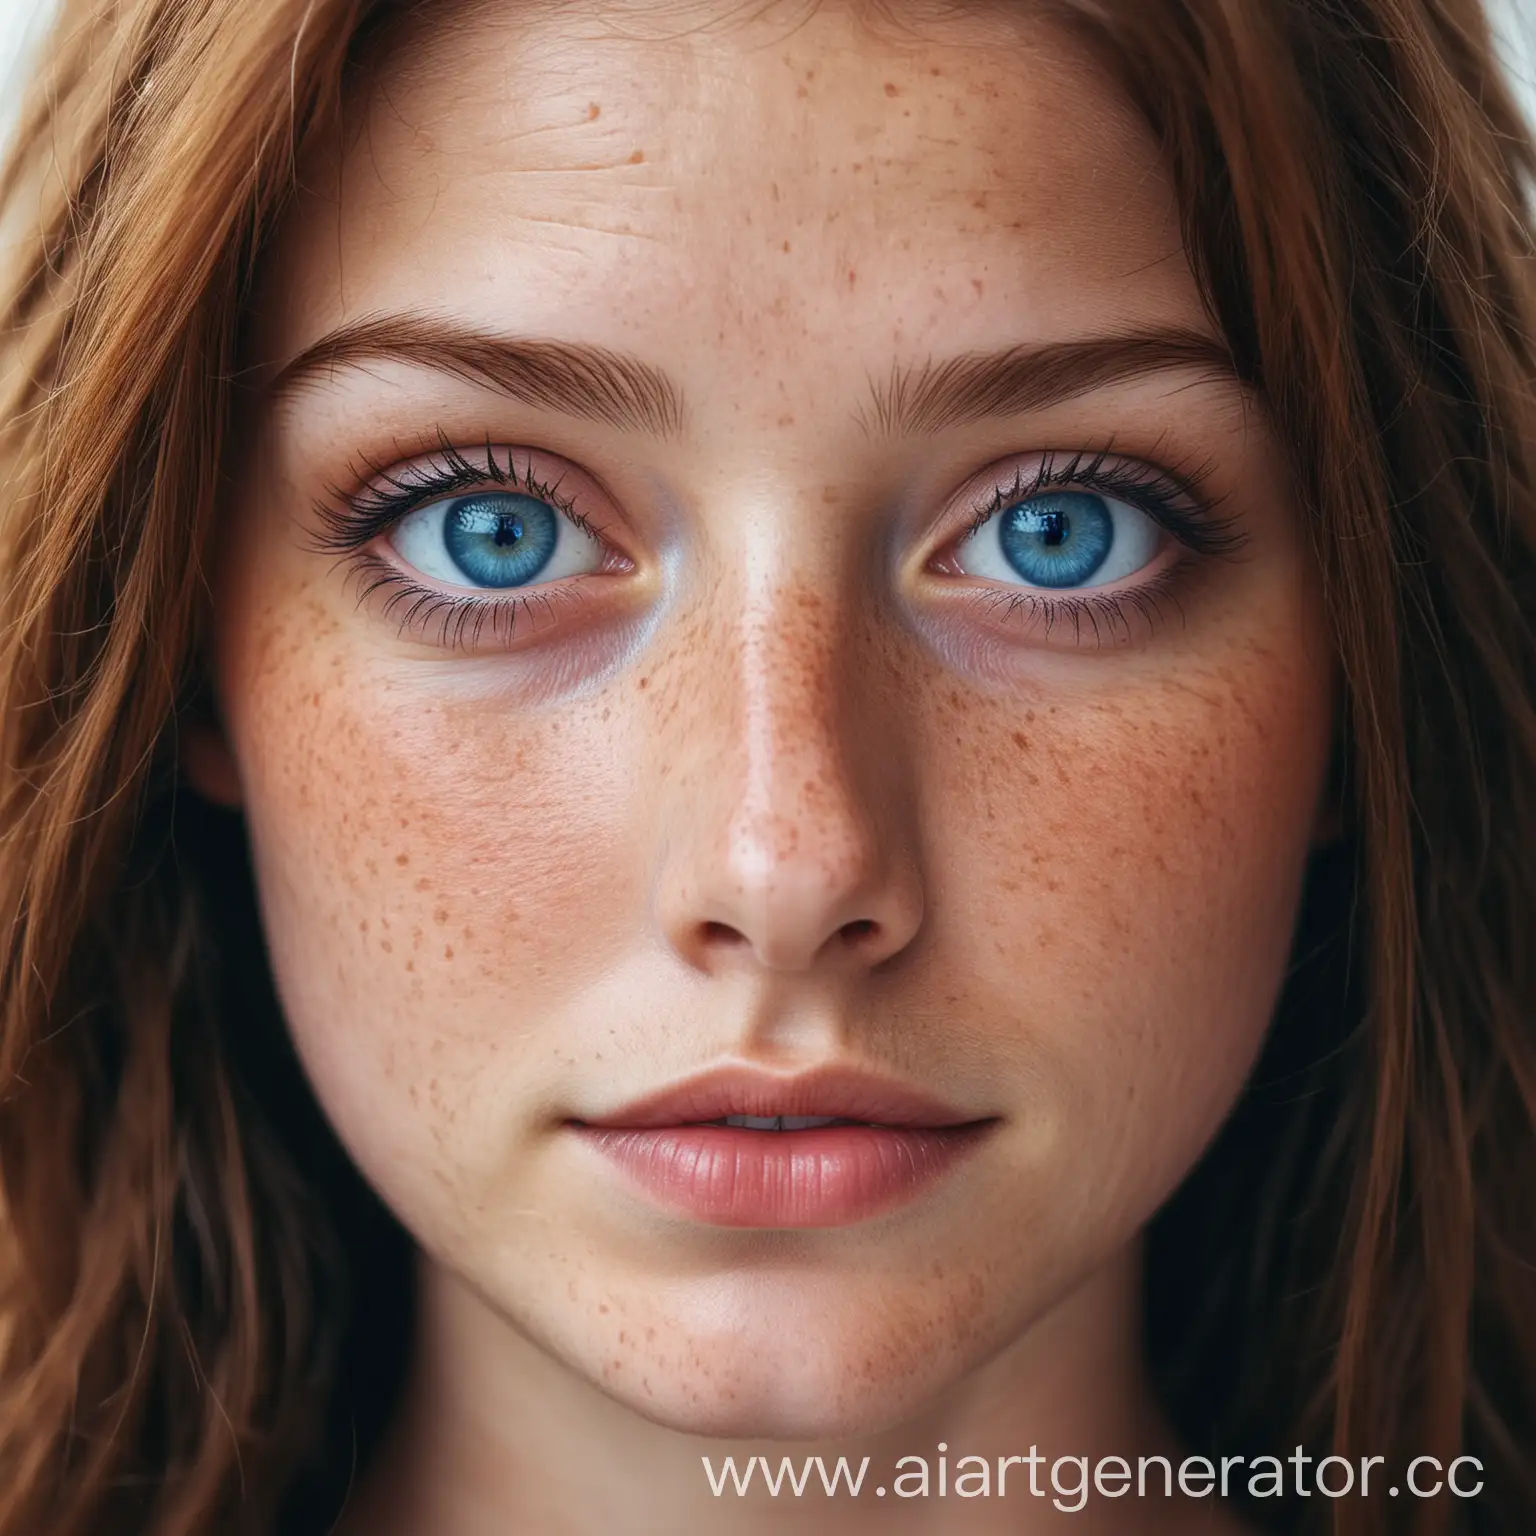 Young-Woman-with-Blue-Eyes-and-Freckles-Portrait